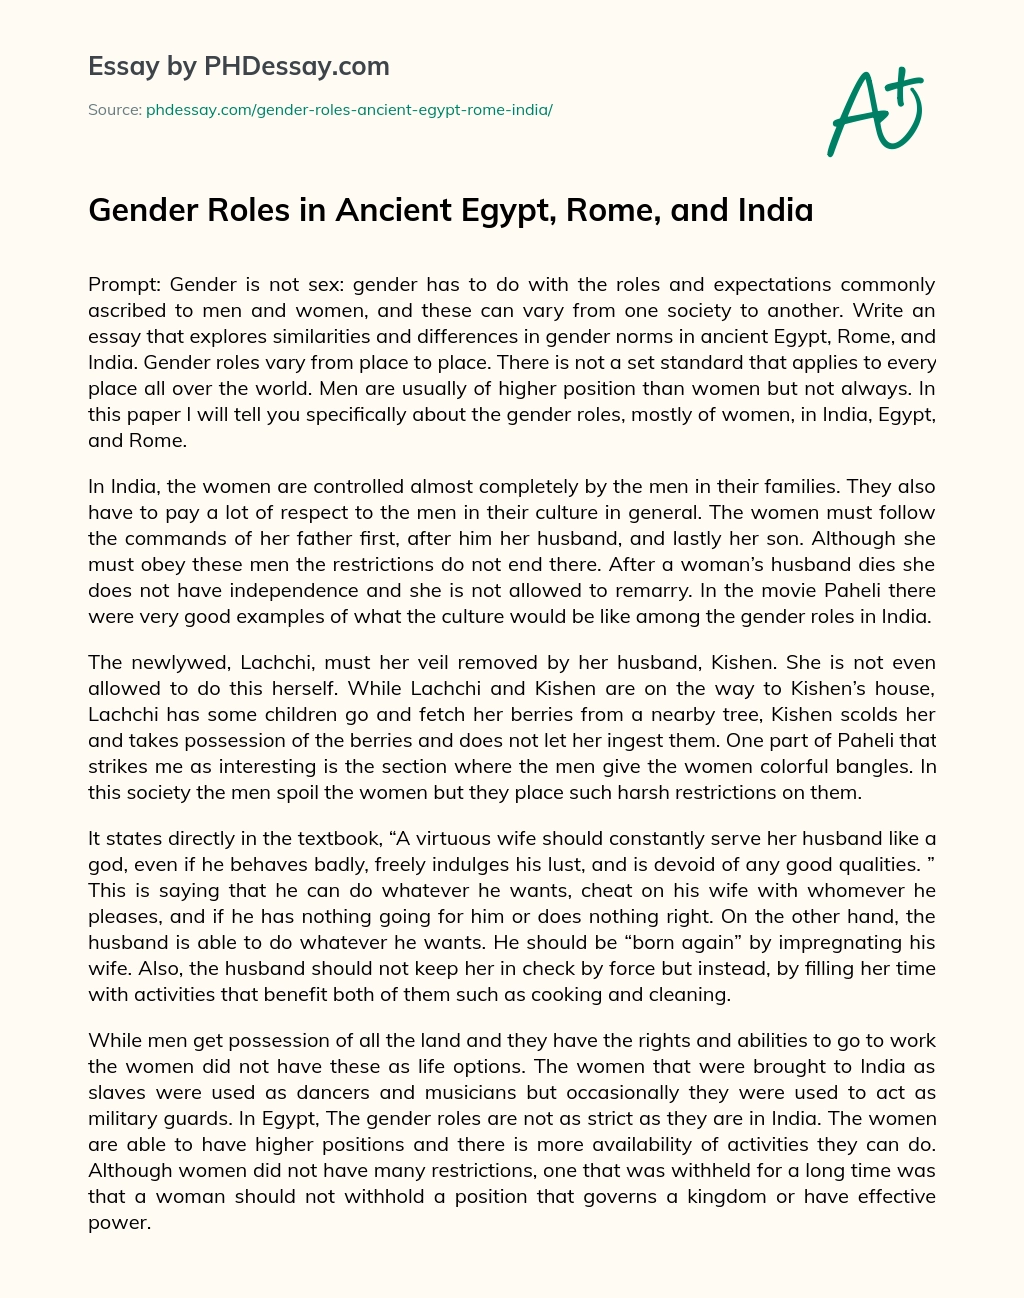 Gender Roles in Ancient Egypt, Rome, and India essay